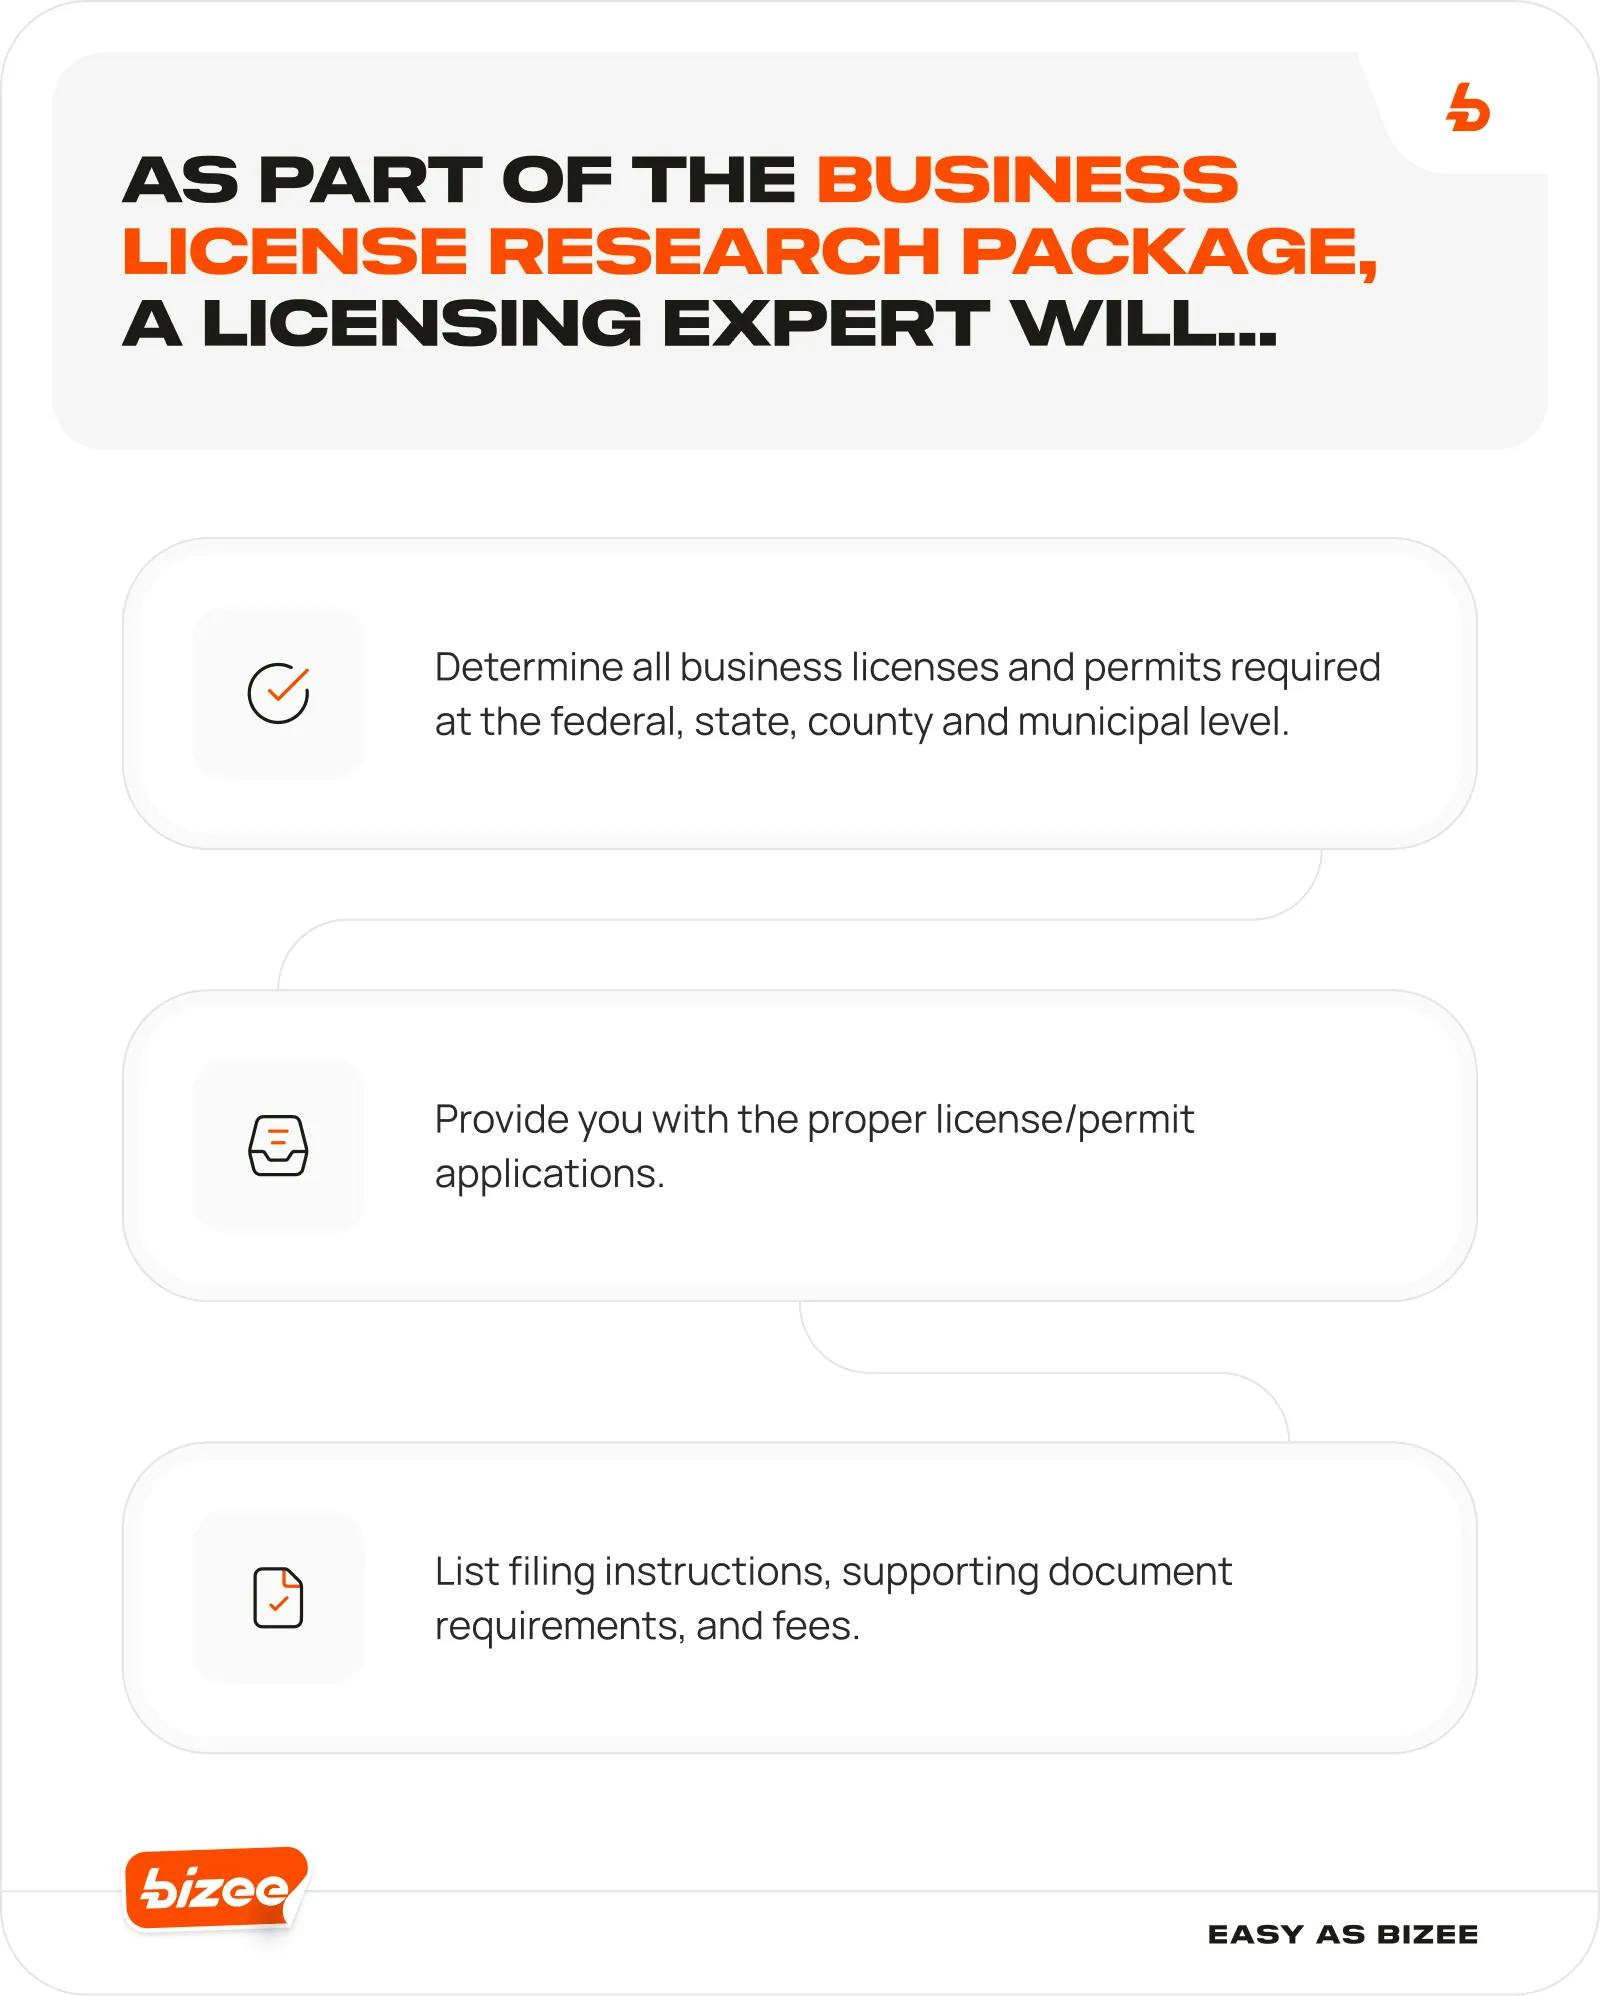 As part of the Business License Research Package, infographic